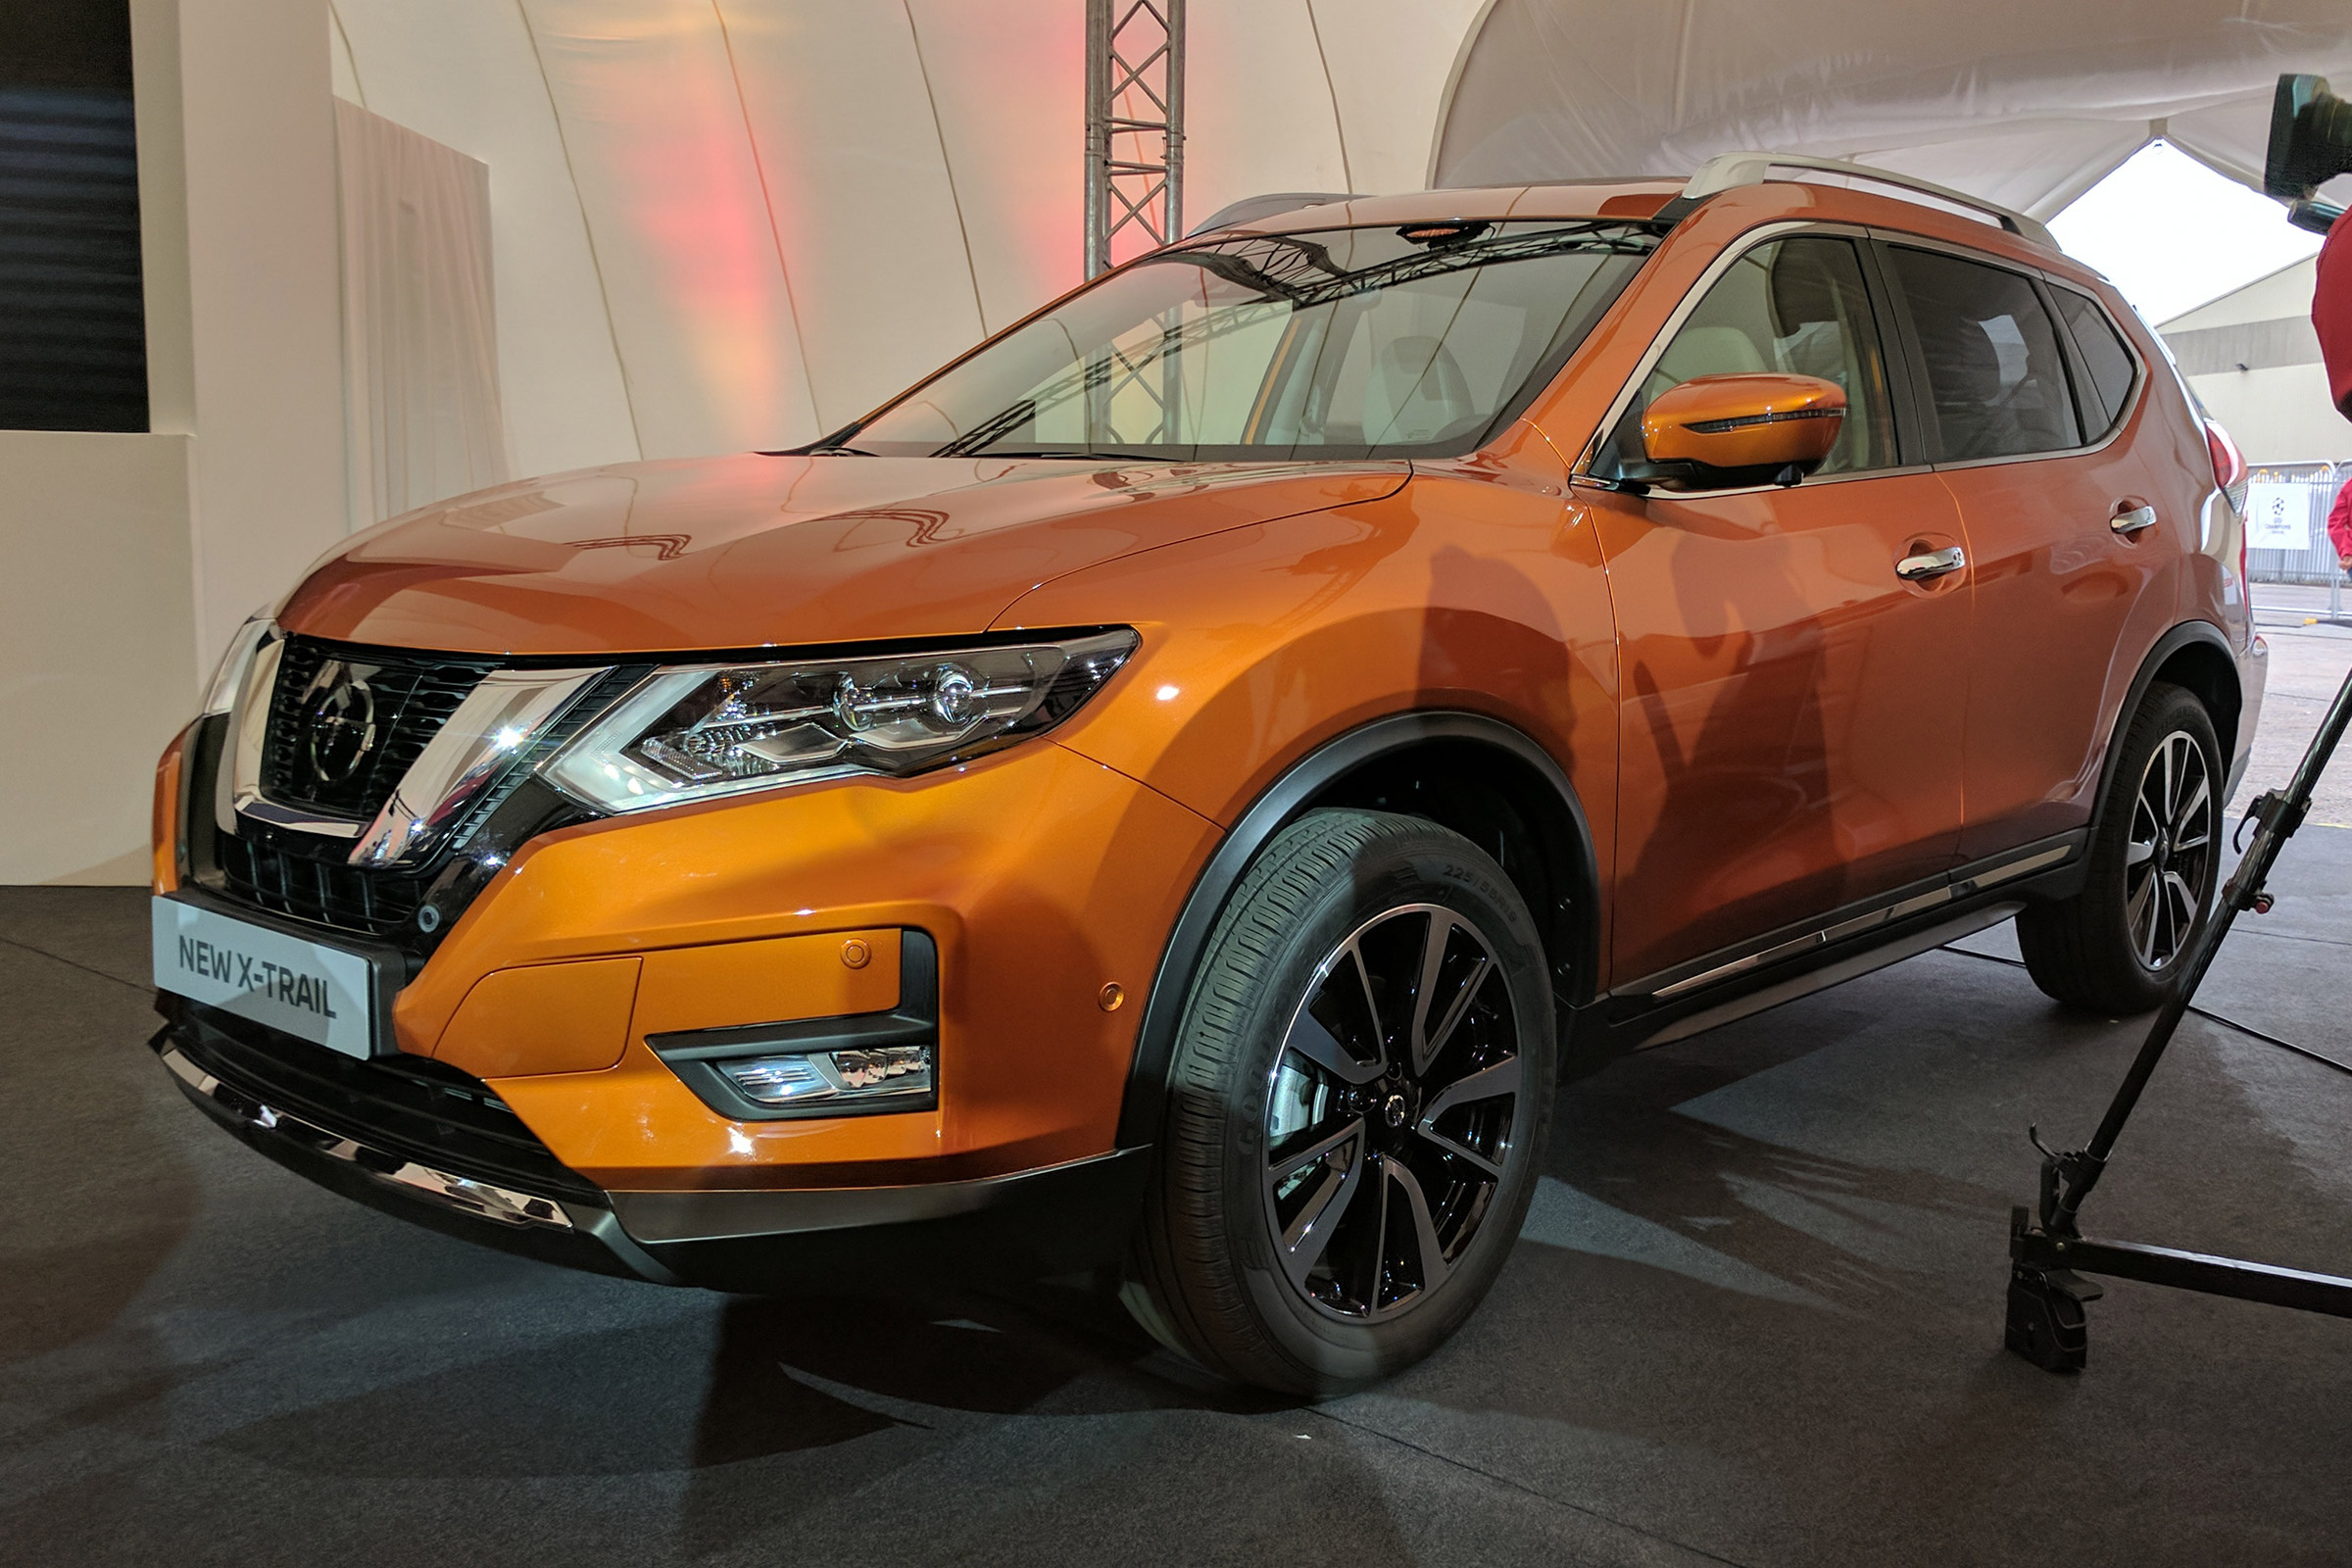 Nissan XTrail SUV facelifted model revealed with subtle